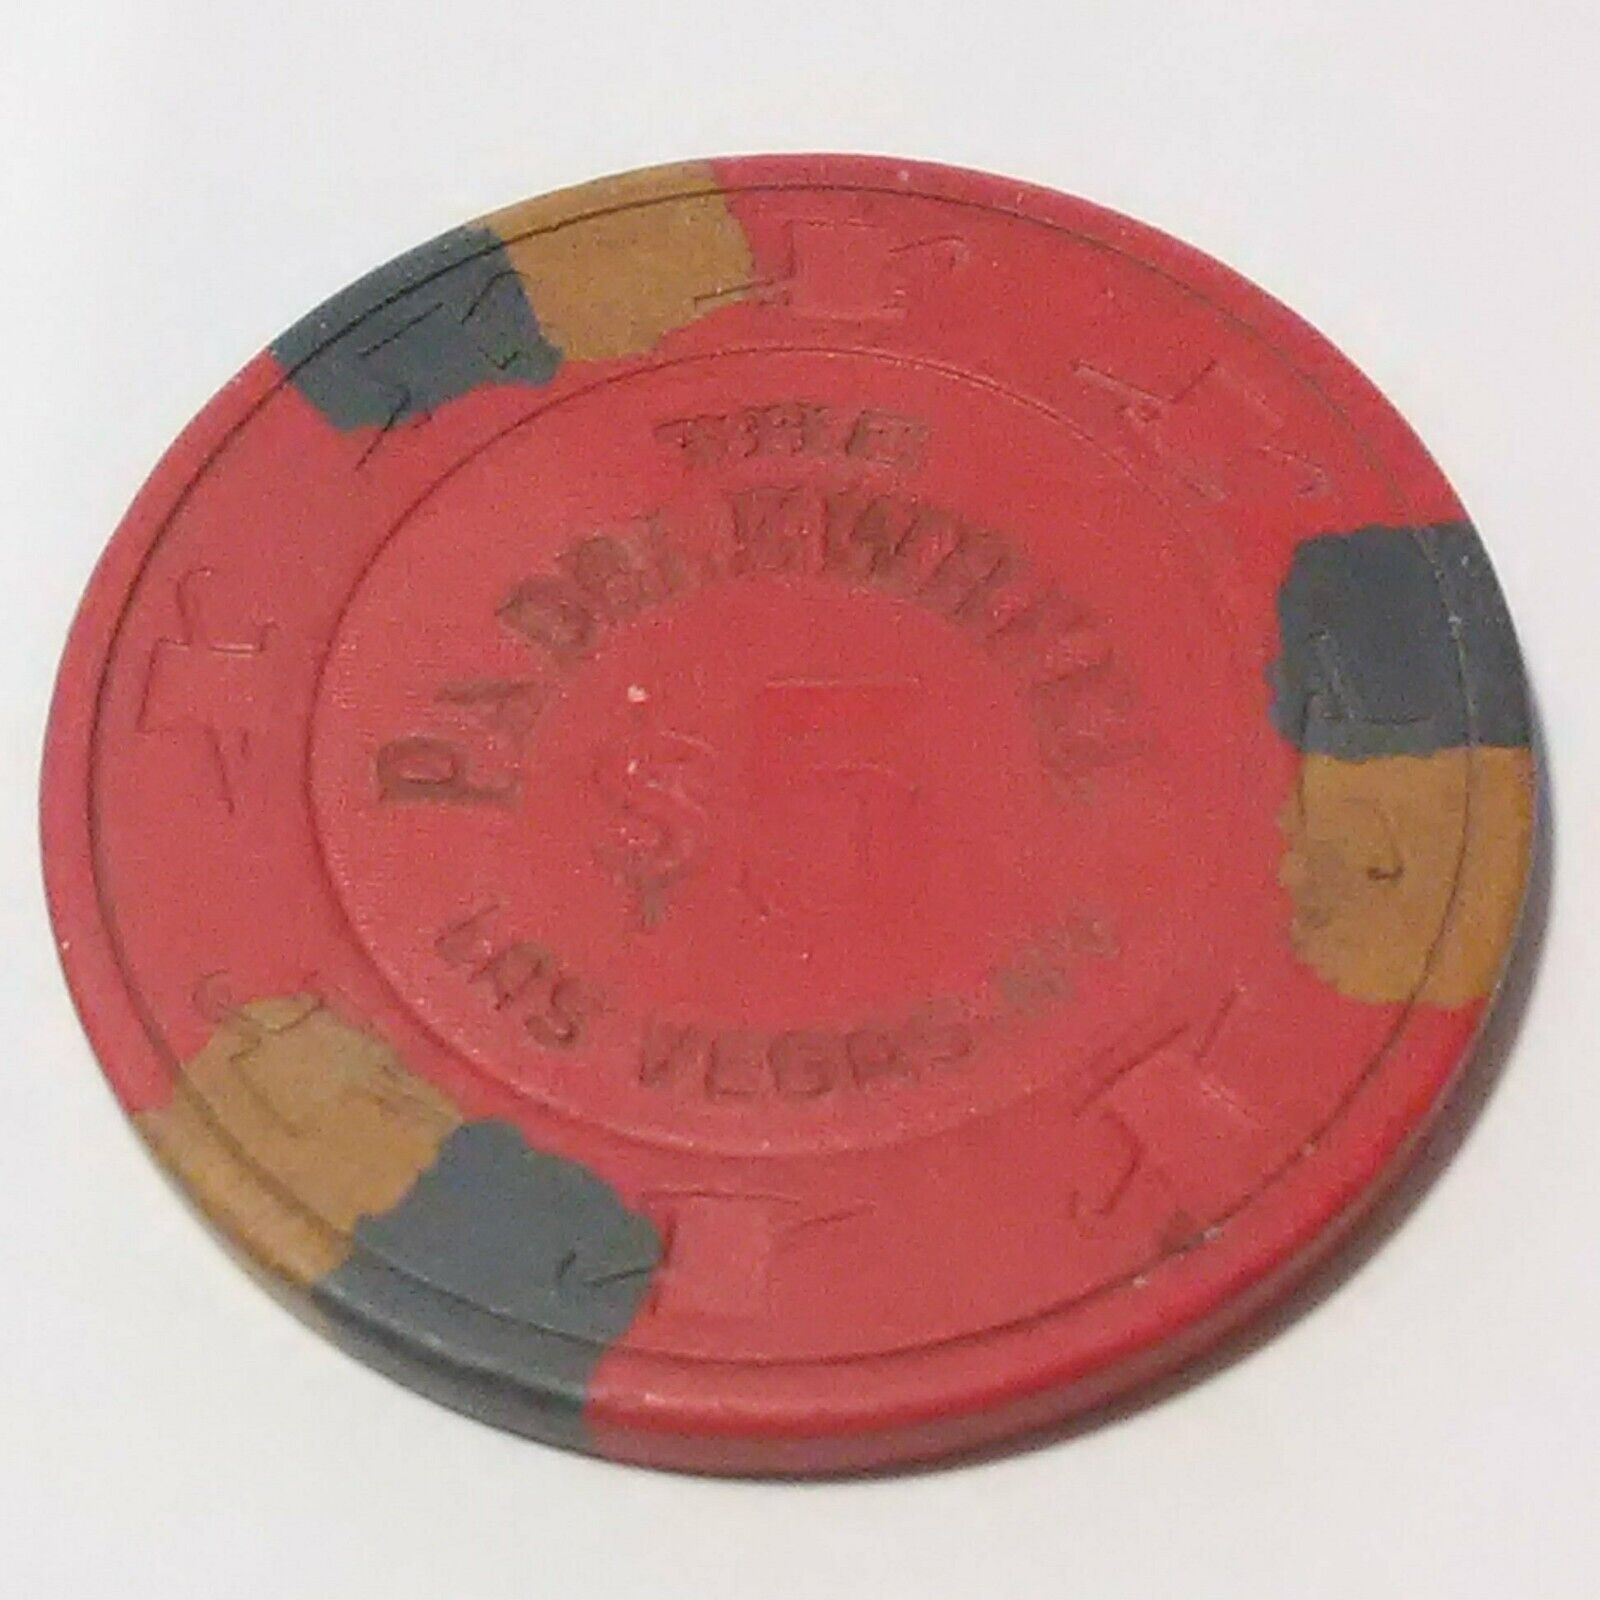 1983 PADDLEWHEEL CASINO LAS VEGAS, NEVADA $5.00 CHIP GREAT FOR ANY COLLECTION